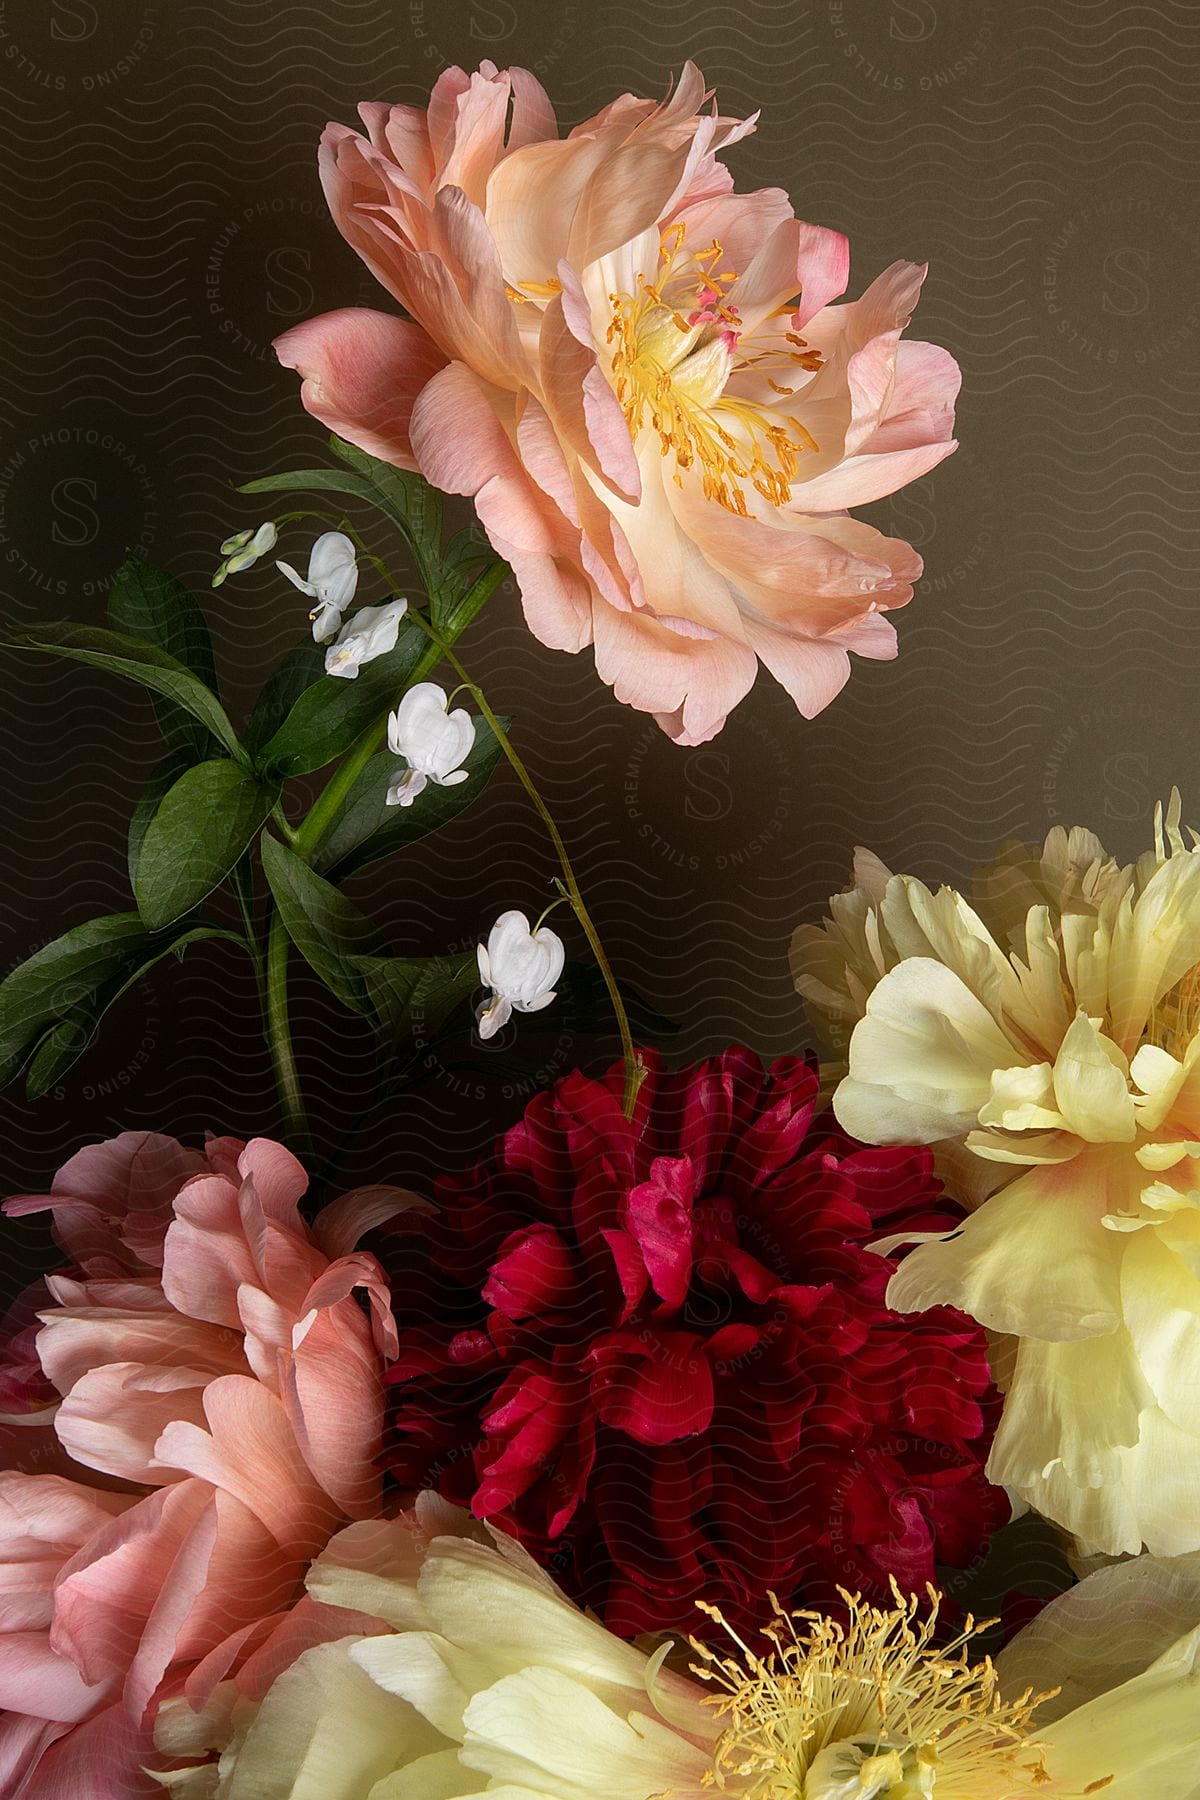 Flowers spread their petals in a colorful arrangement